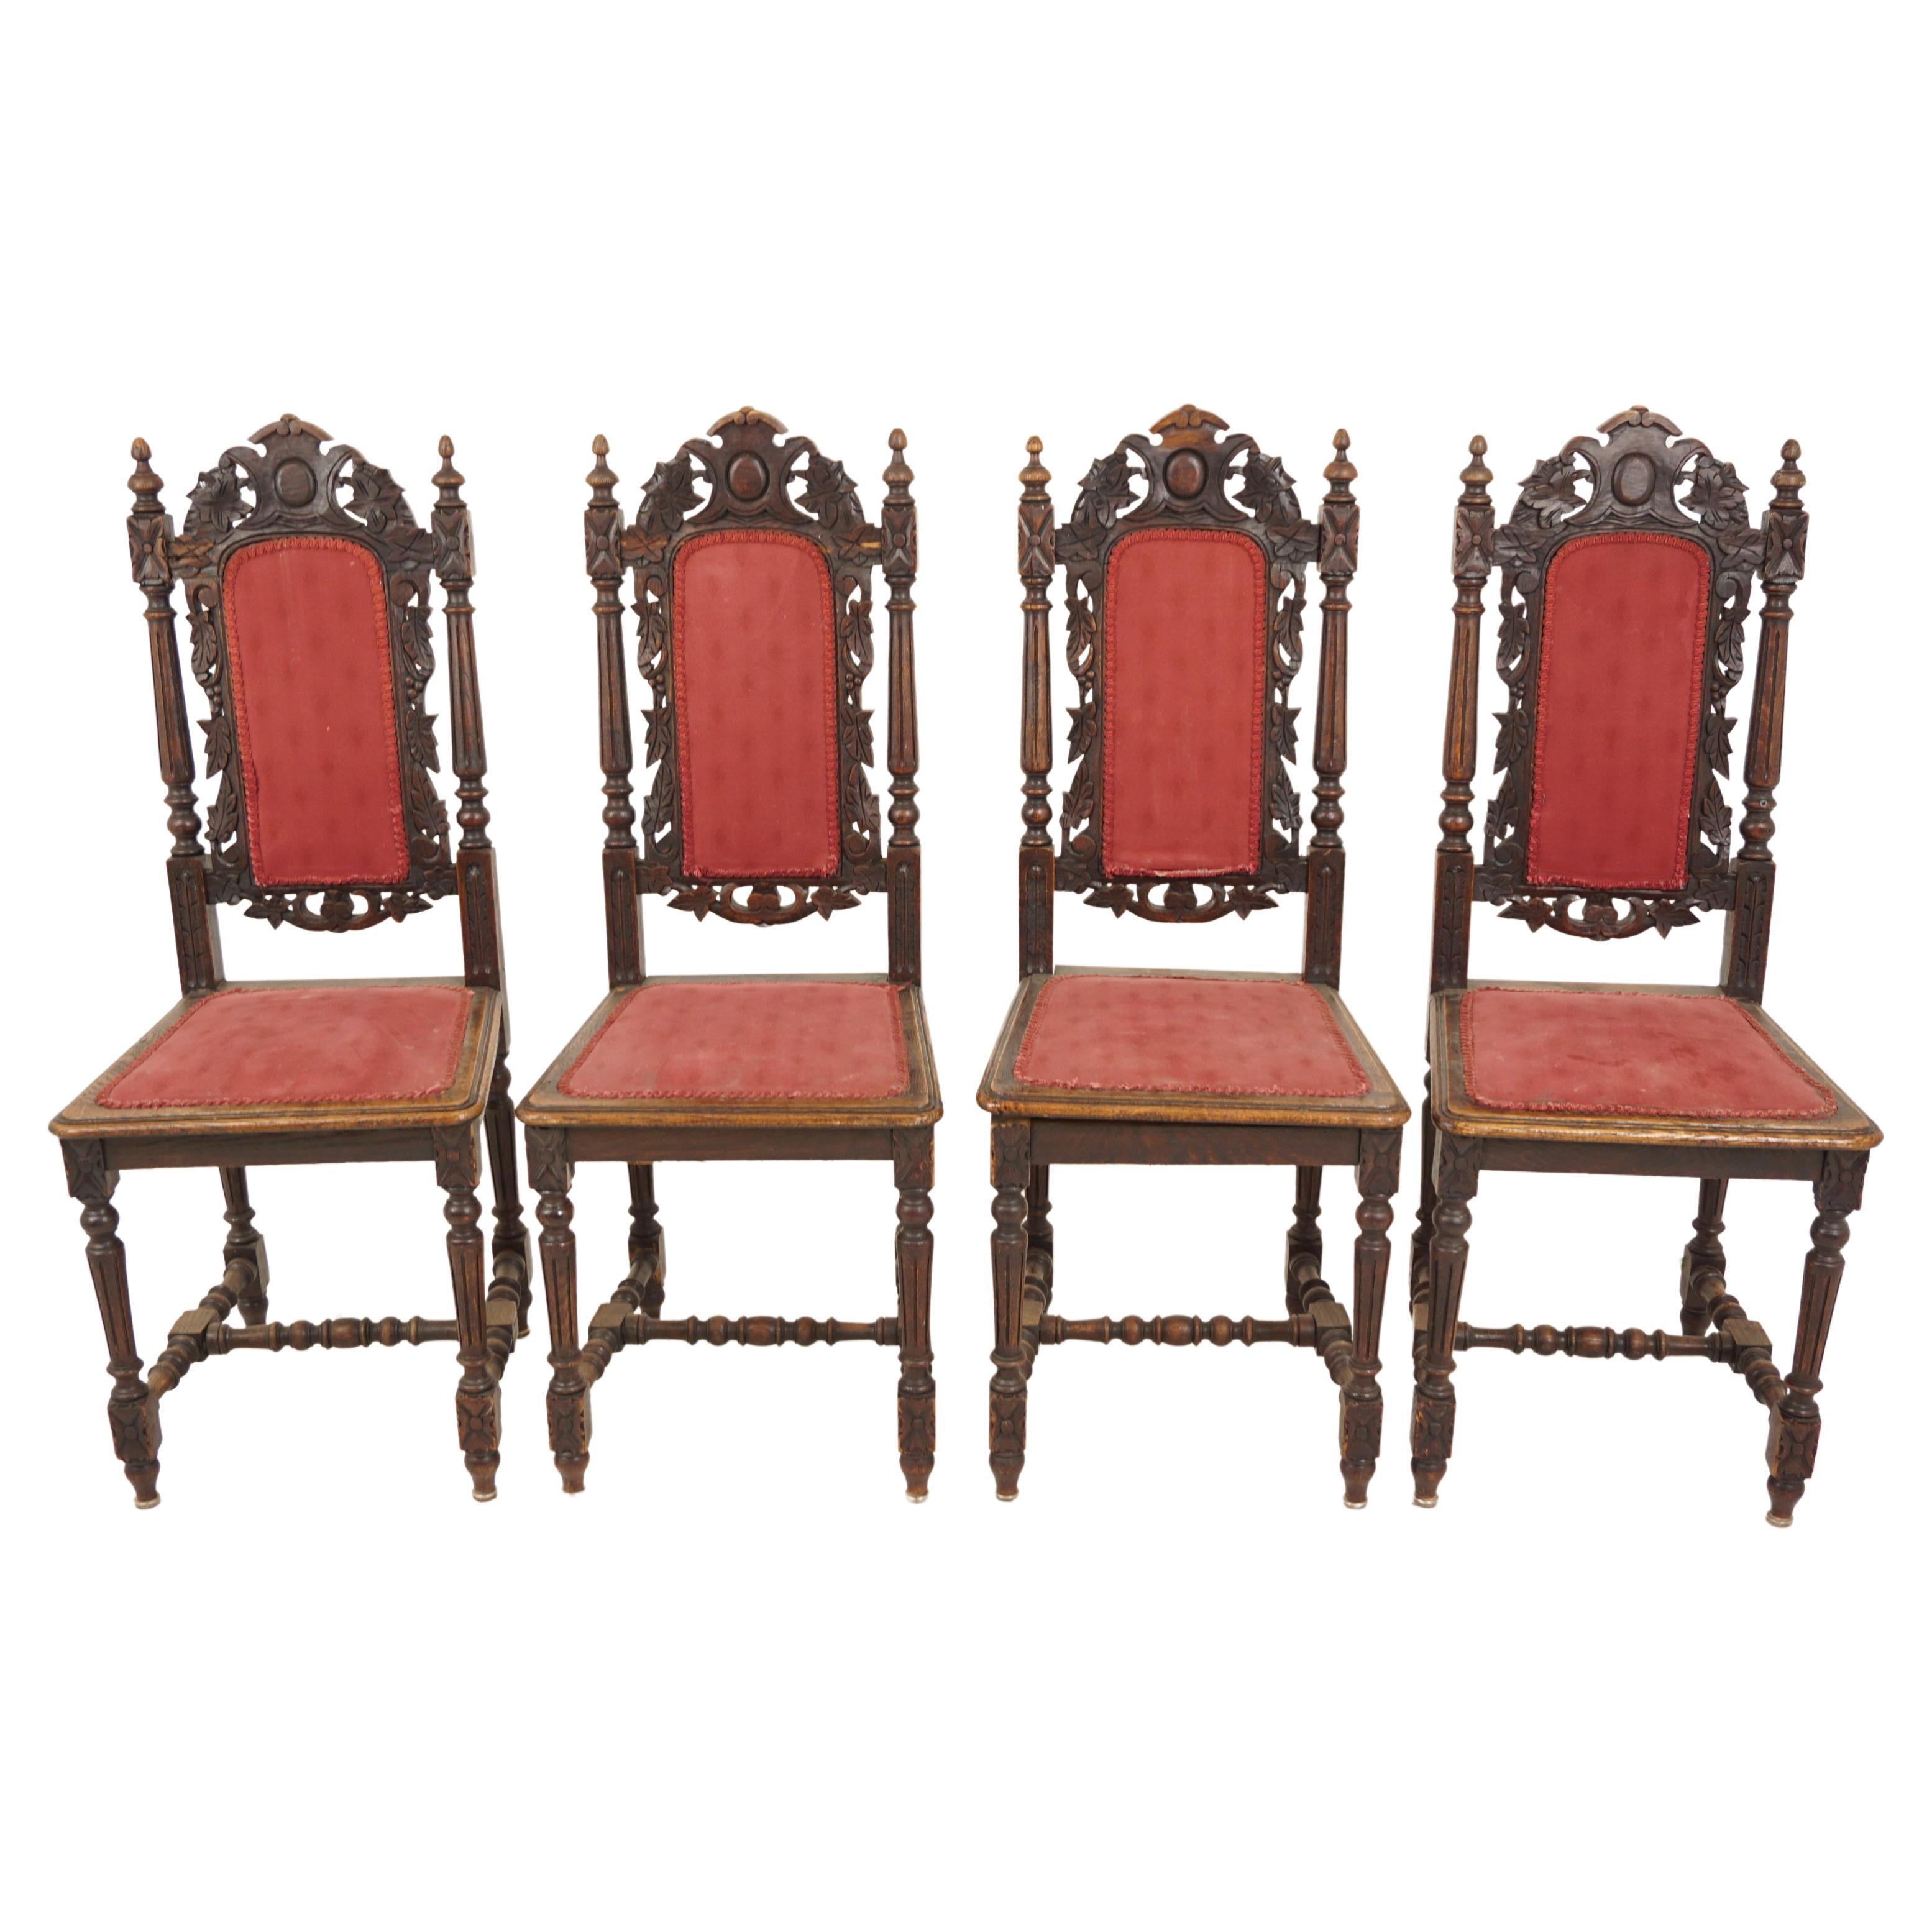 4 Victorian Carved Oak Carolean Style Dining Chairs, Scotland 1890, H177